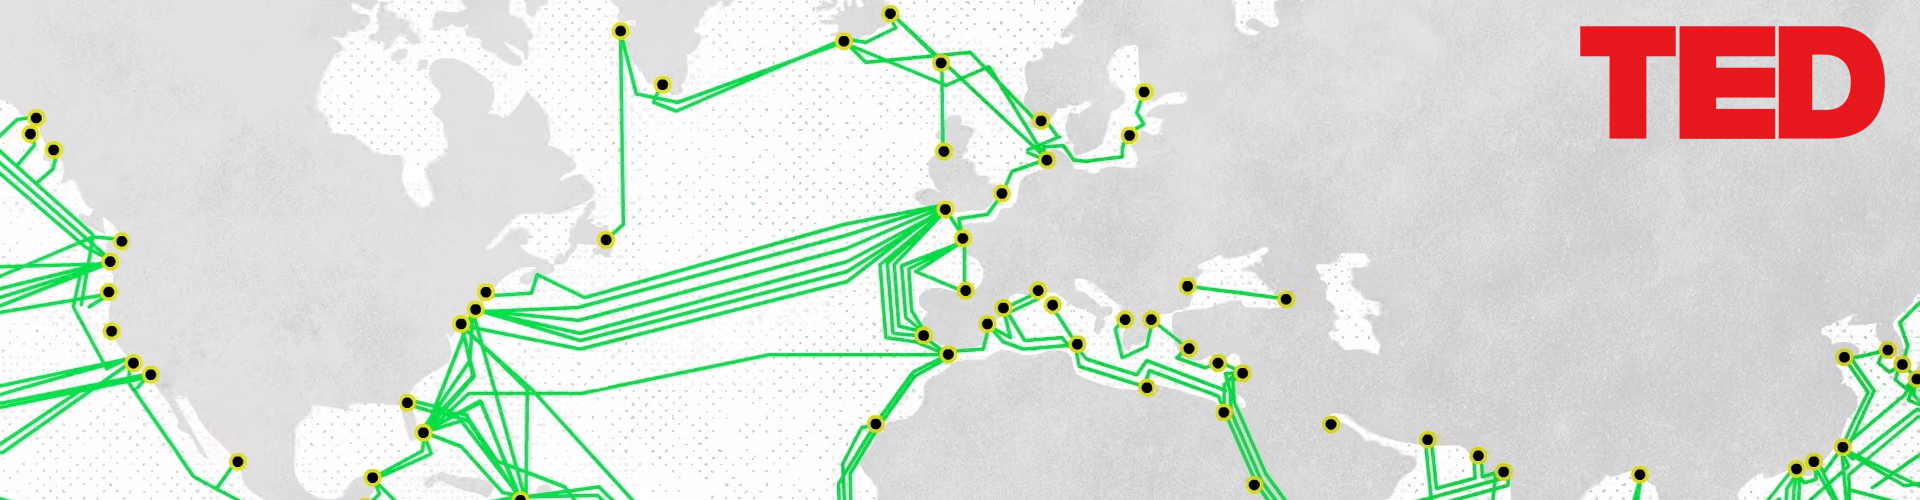 The hidden network that makes the internet possible